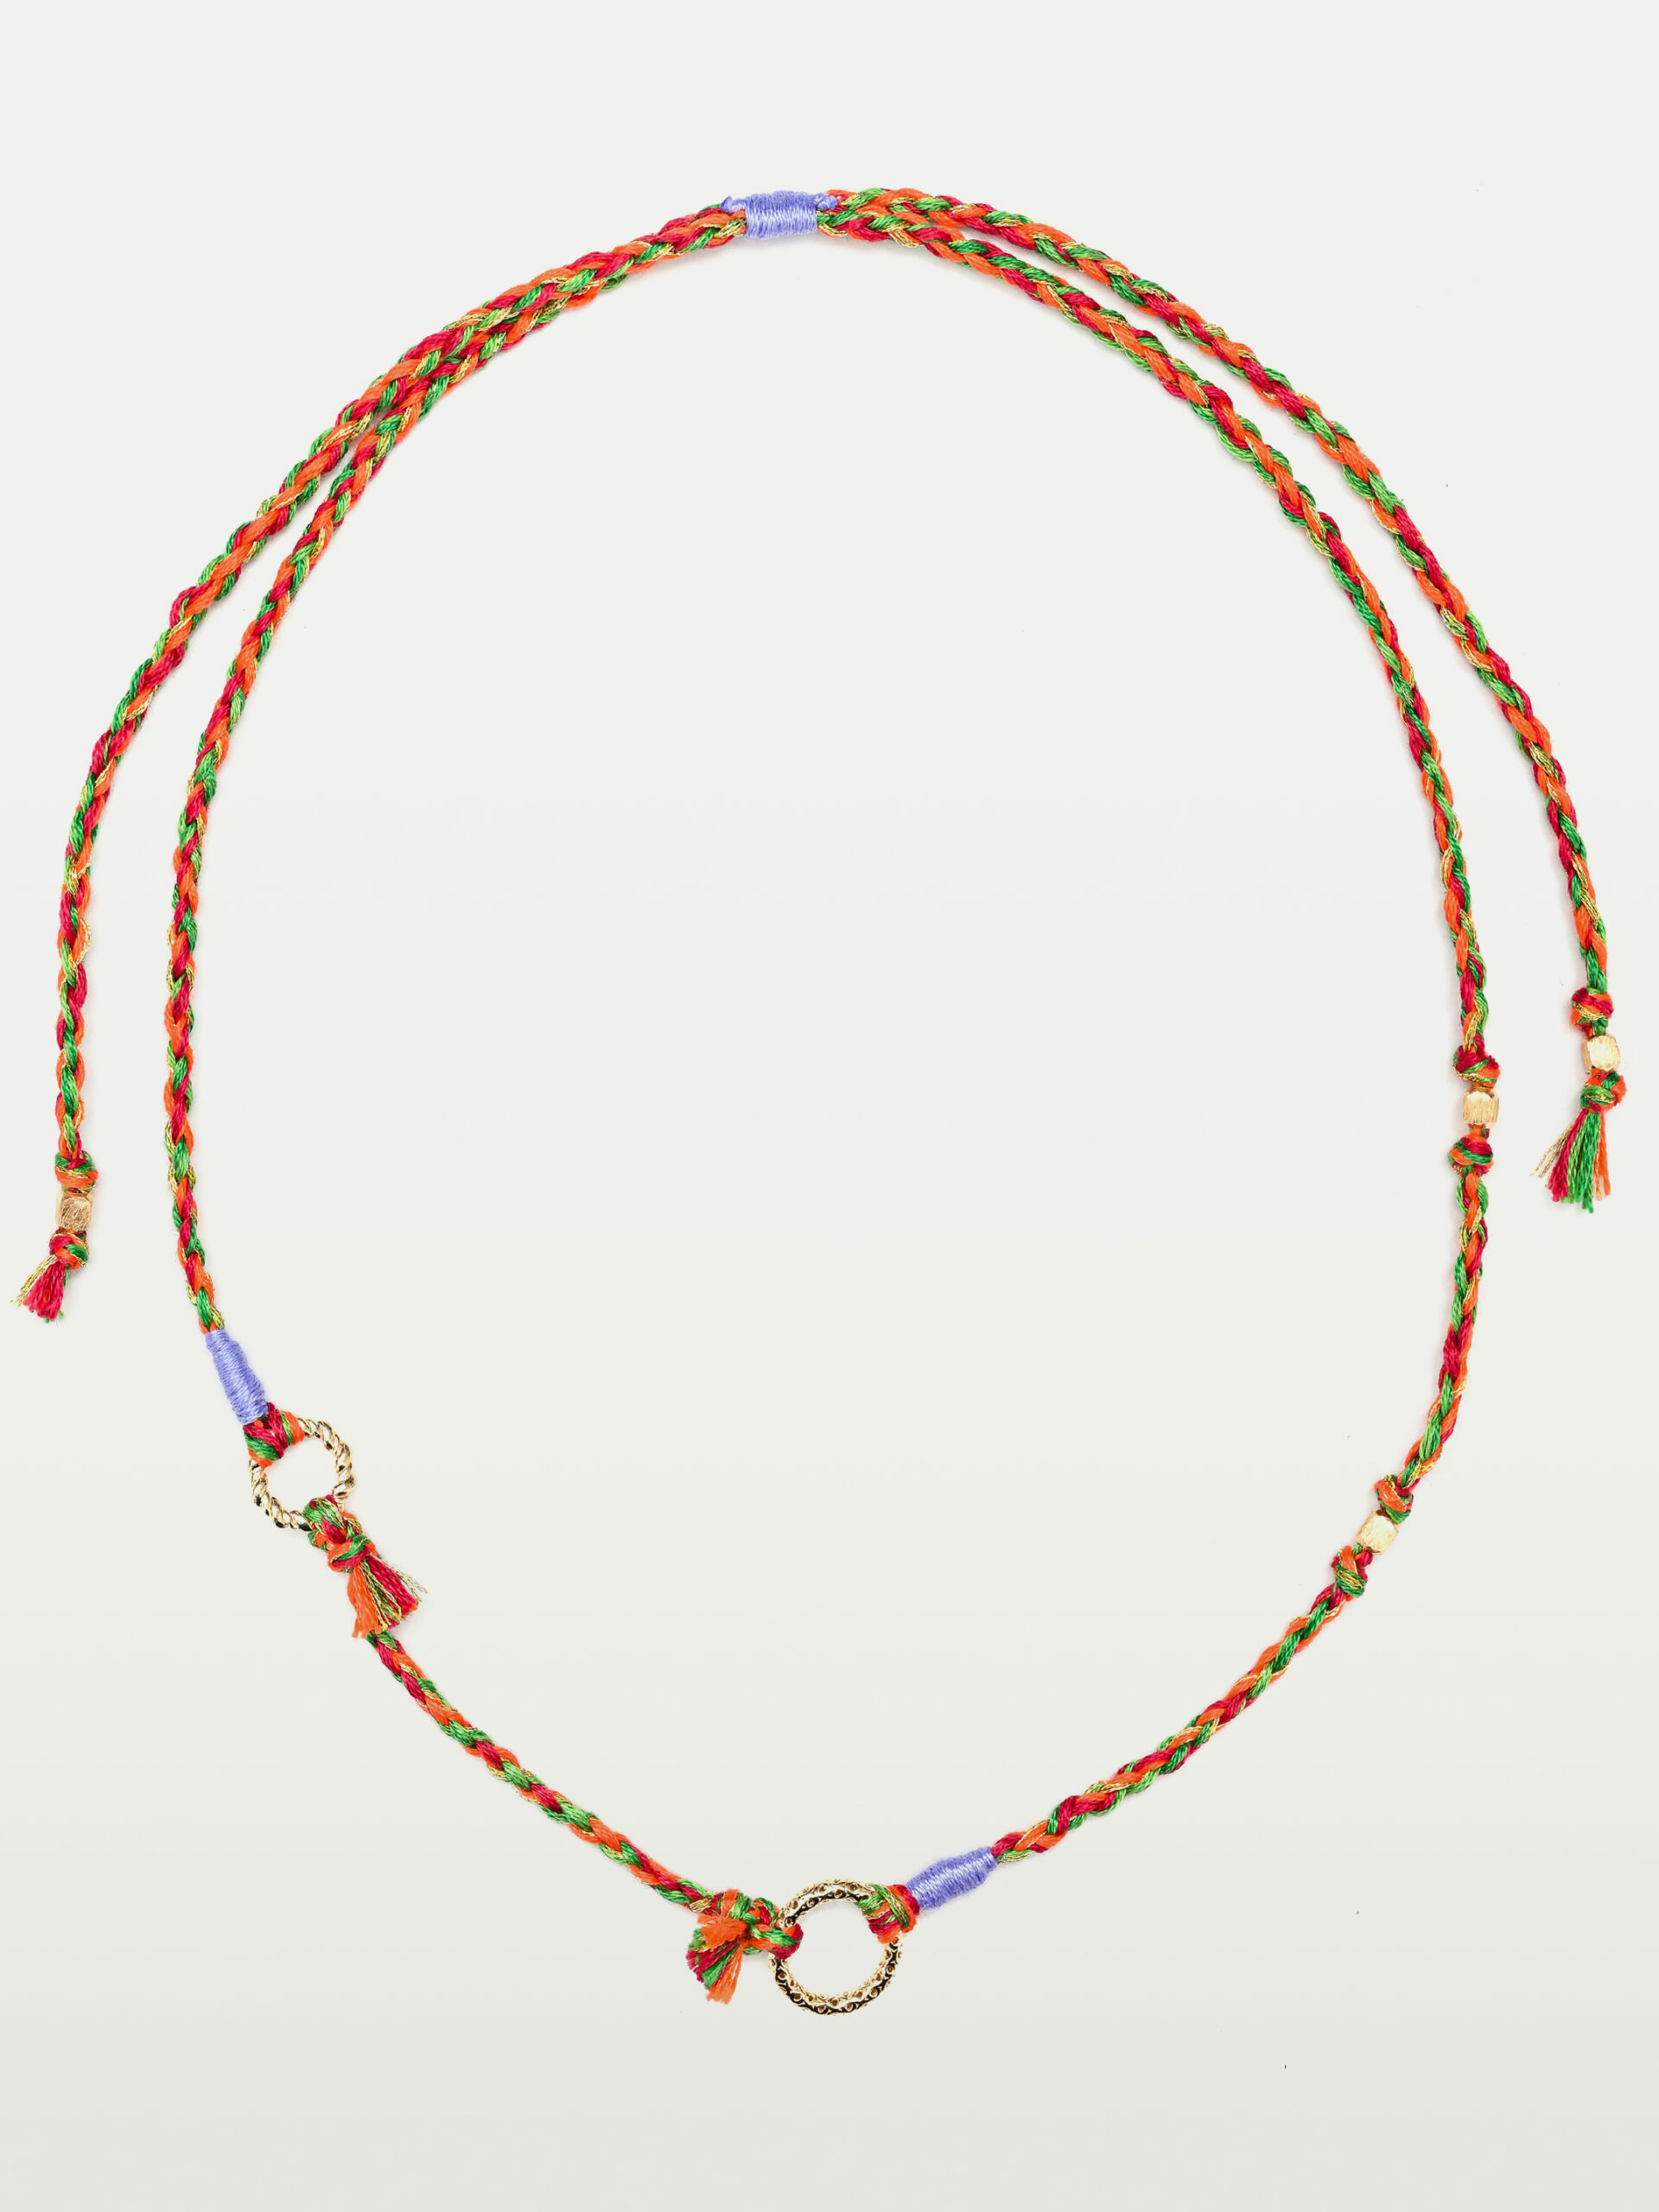 Colorful thread necklace